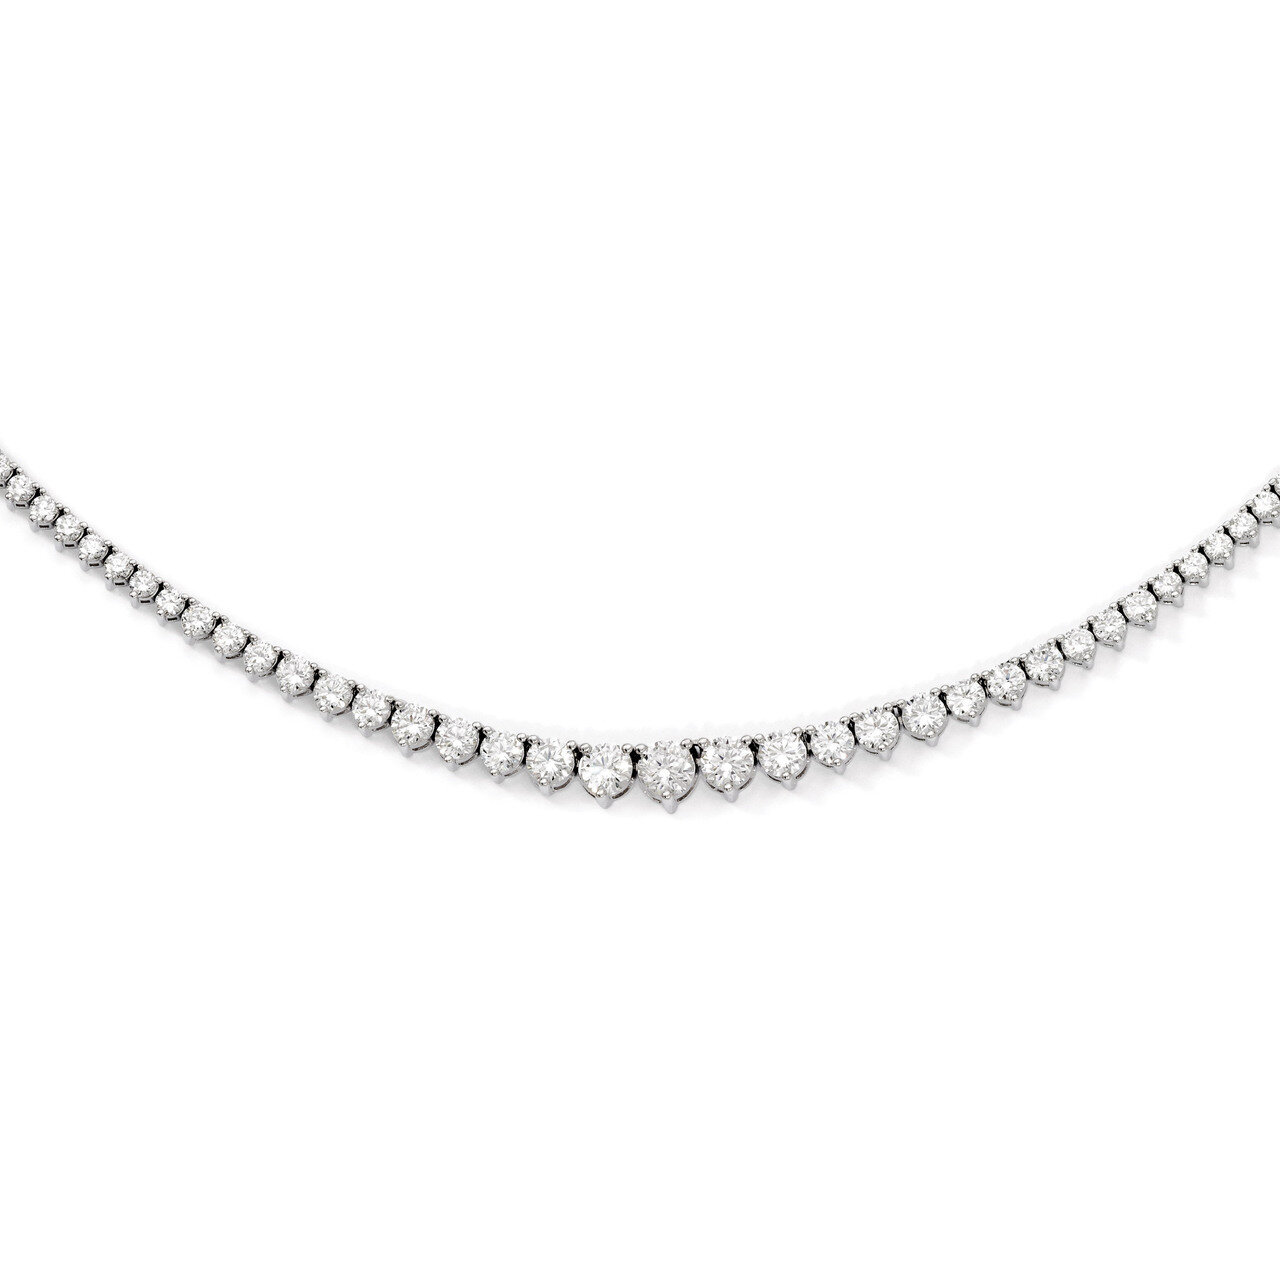 91 Stone Diamond Necklace Sterling Silver Rhodium-plated QG3131-17